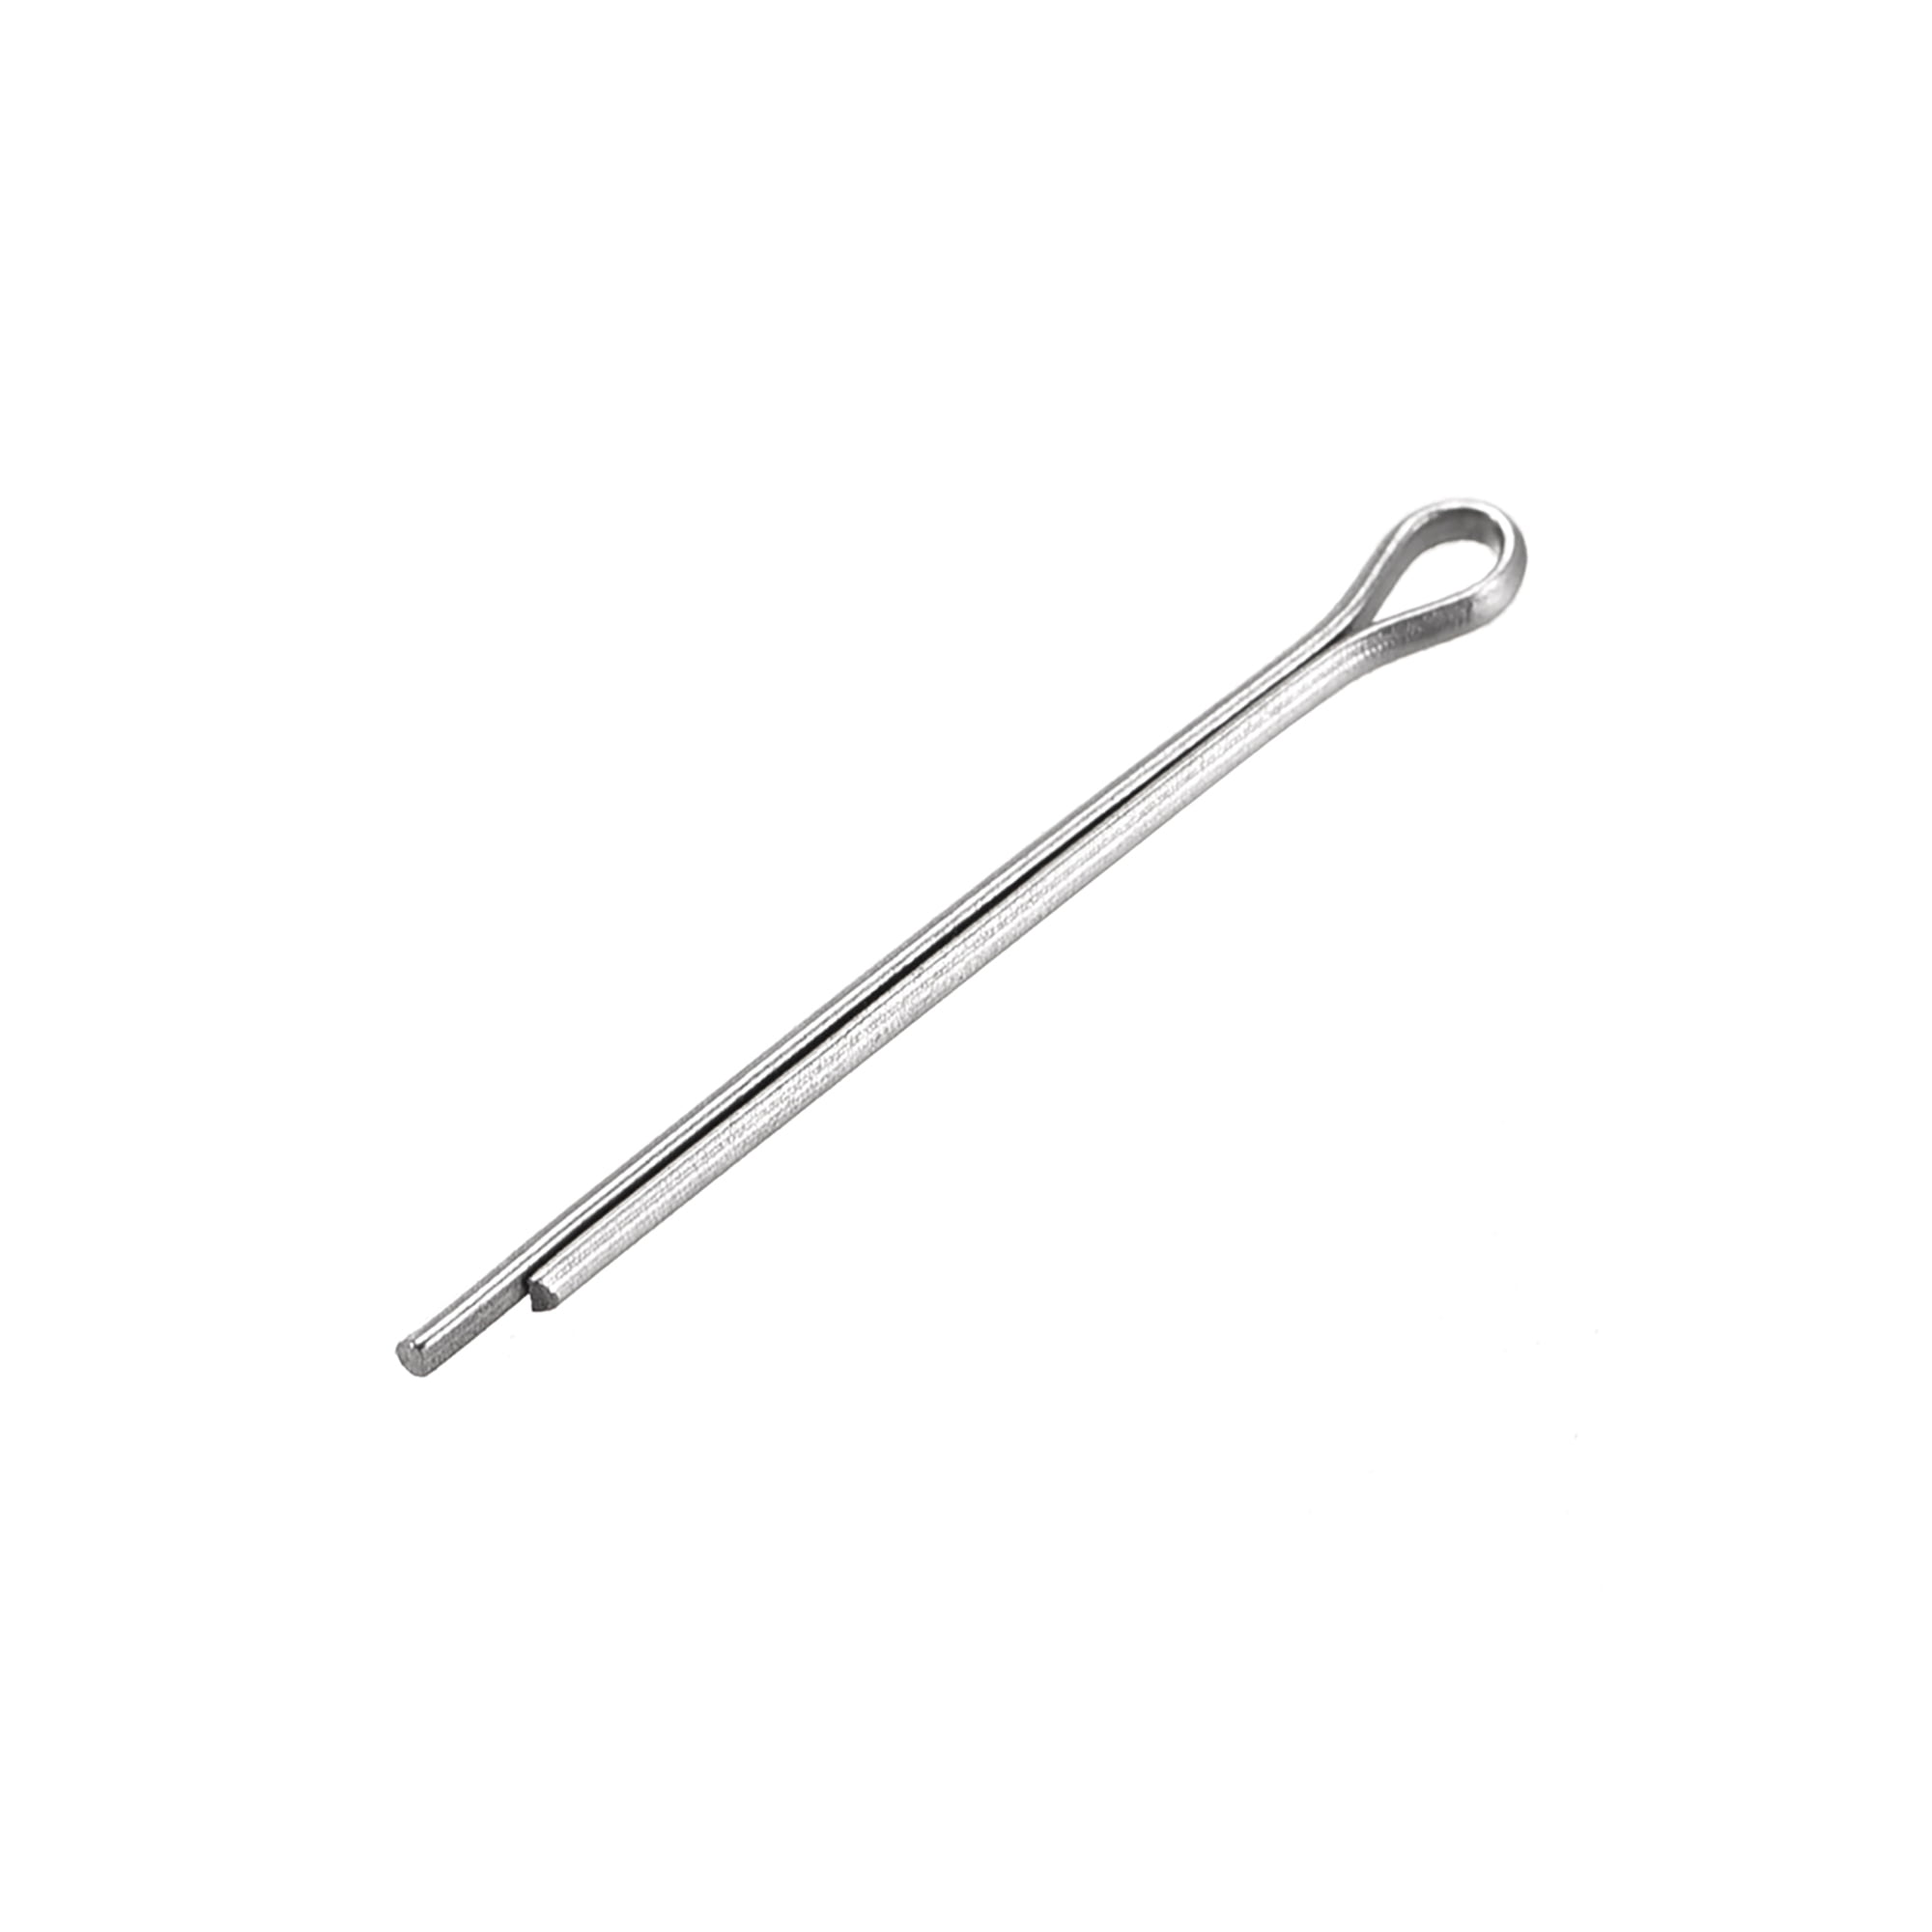 Cotter Pins Assorted 120 Pack . SPLIT PINS Mixed Lengths . 